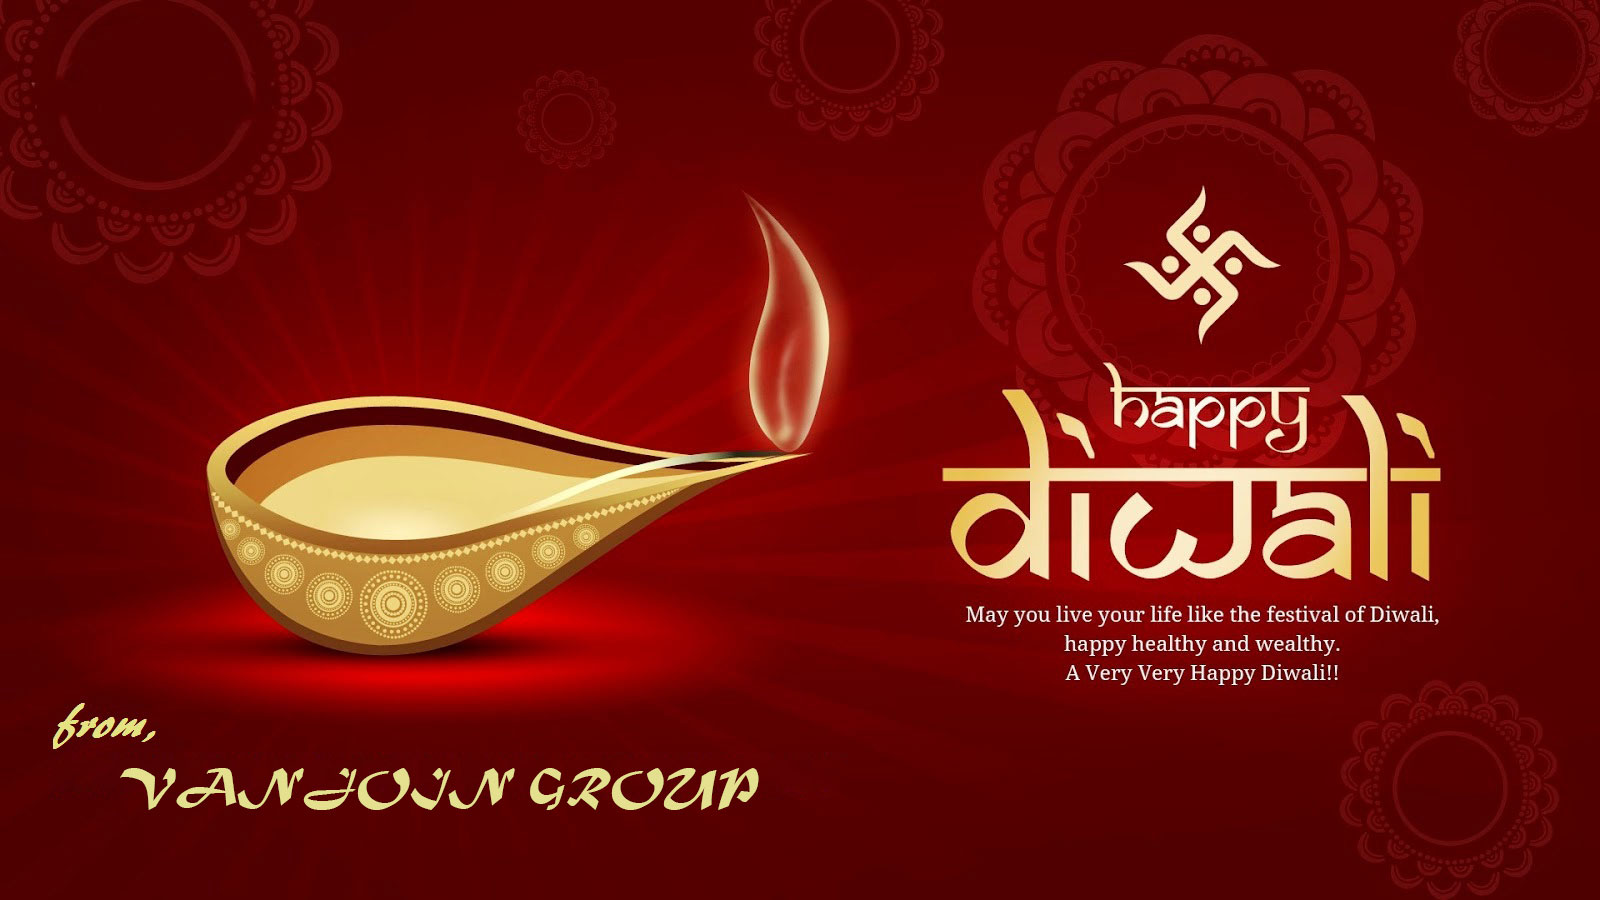 Happy Diwali to all Indian customers!